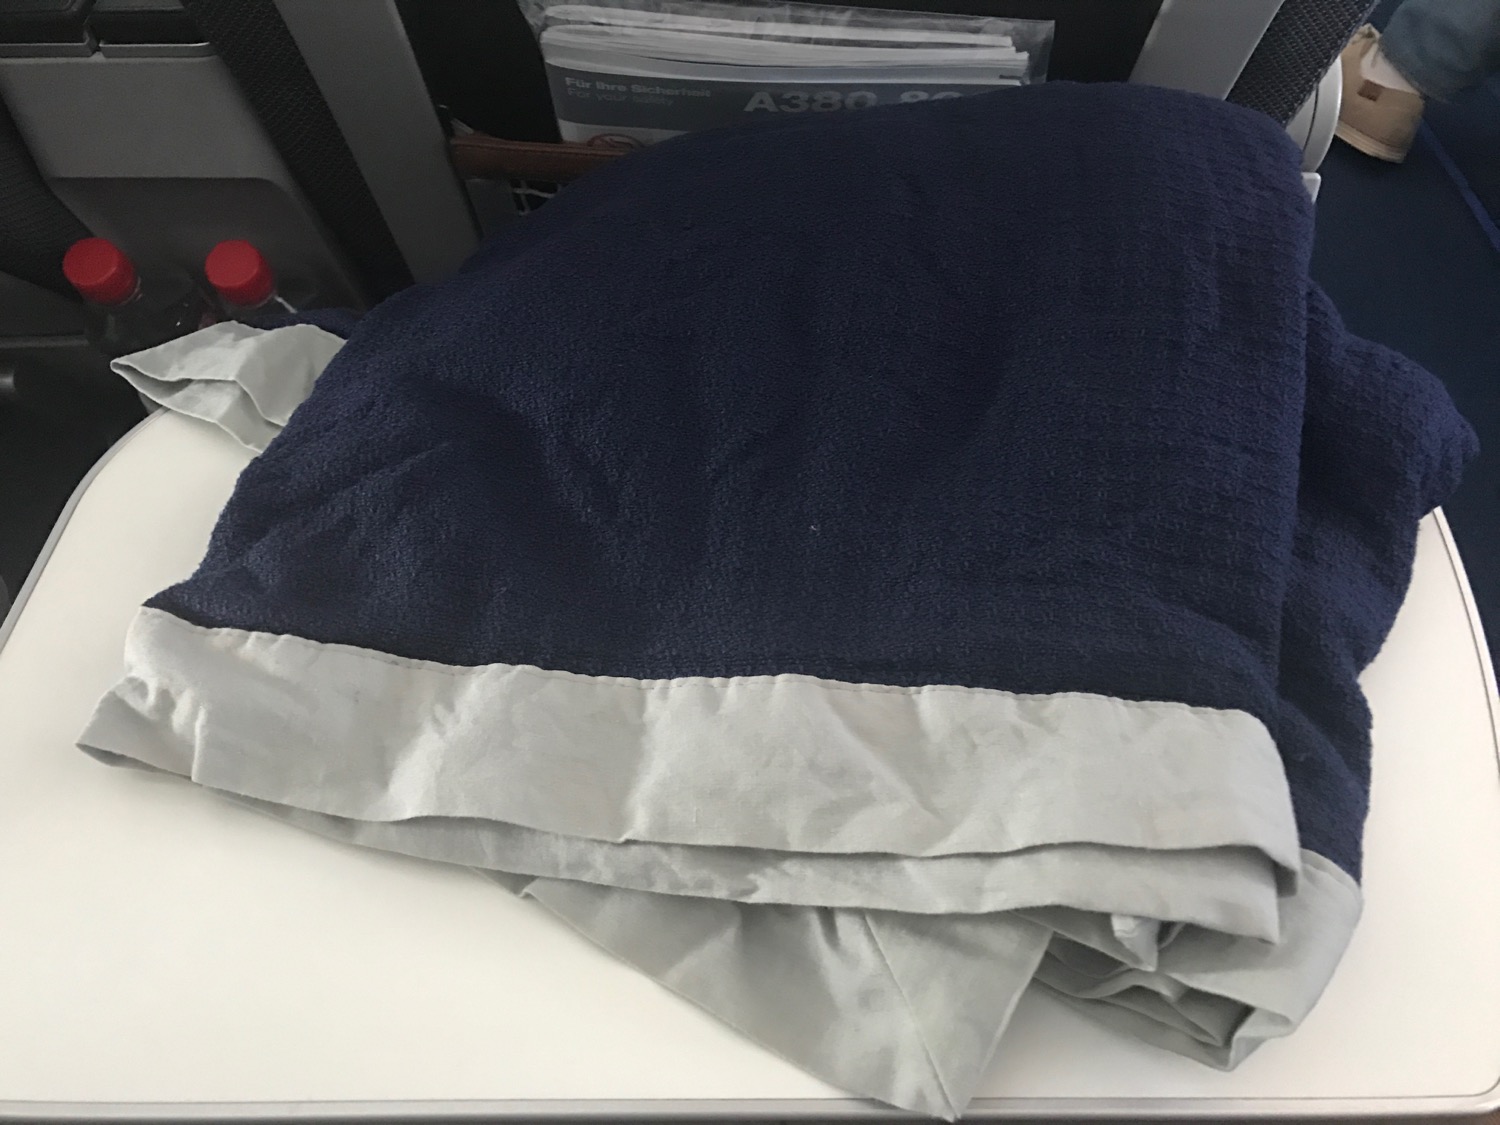 a blue and grey blanket on a white surface